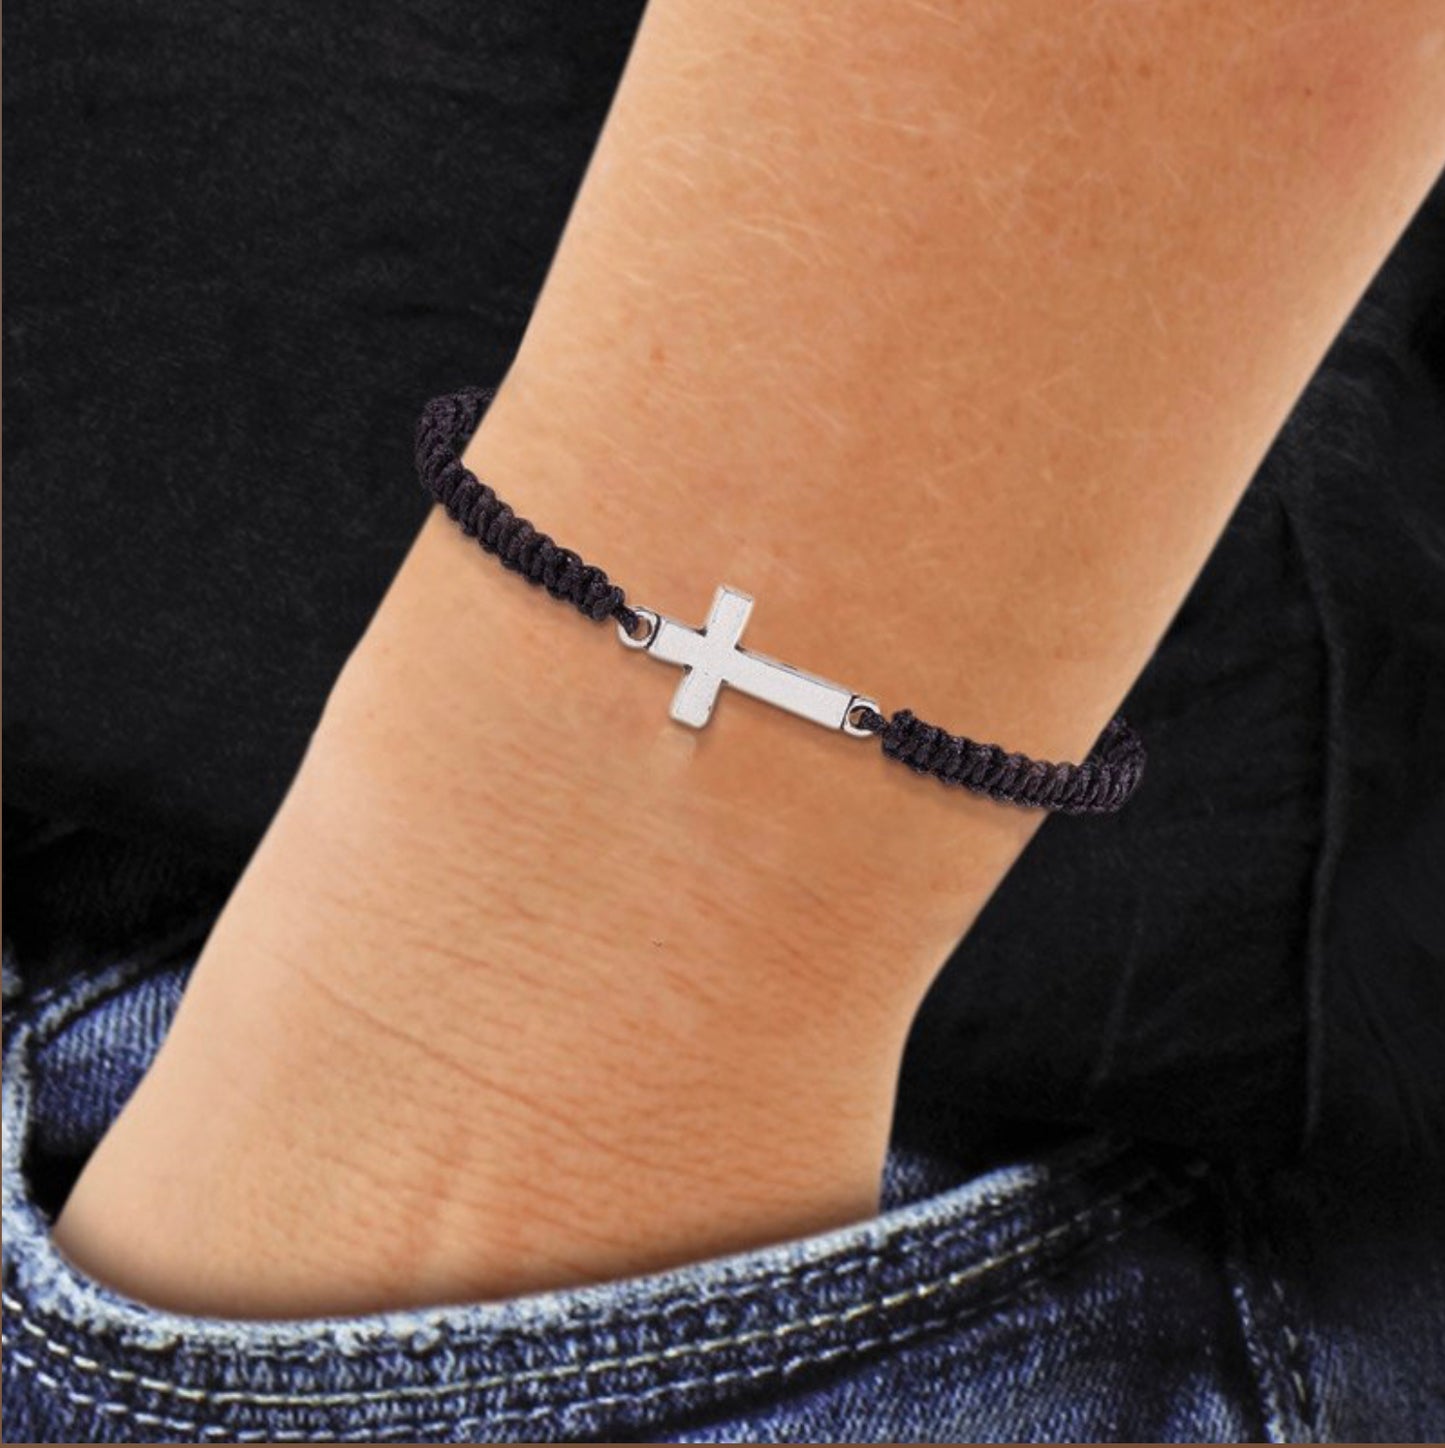 I Can Do All Things Through Christ Bracelet with Card